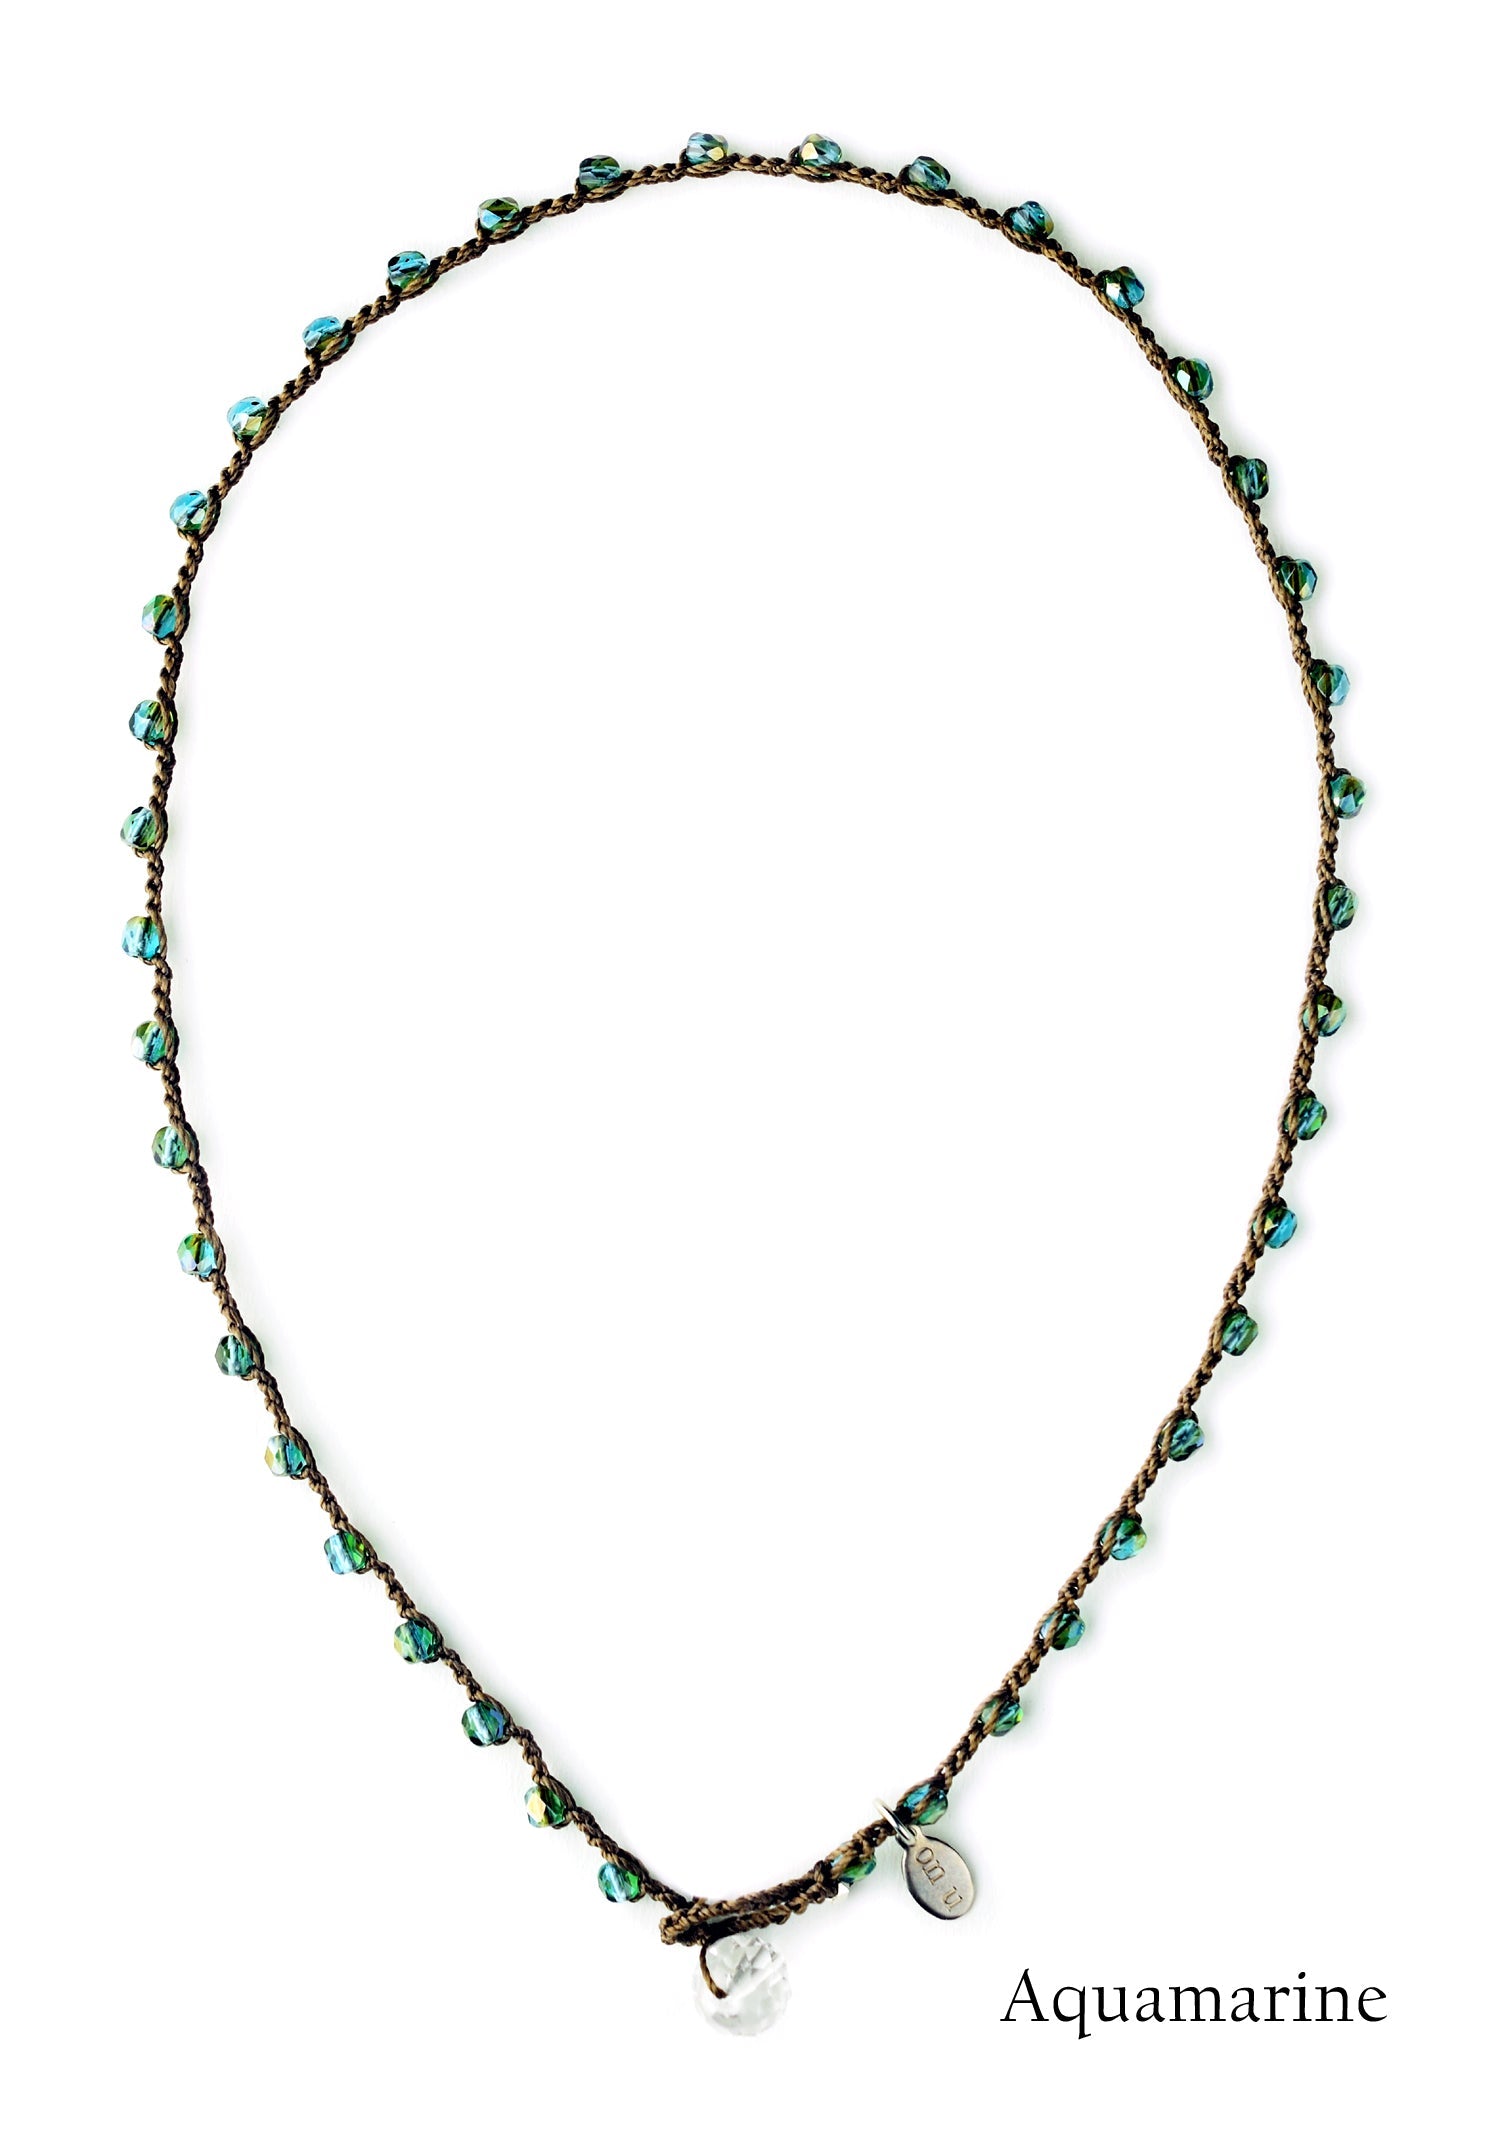 Shades of Turquoise Layer Mini Beads Stainless Steel Necklace - Cissy Pixie